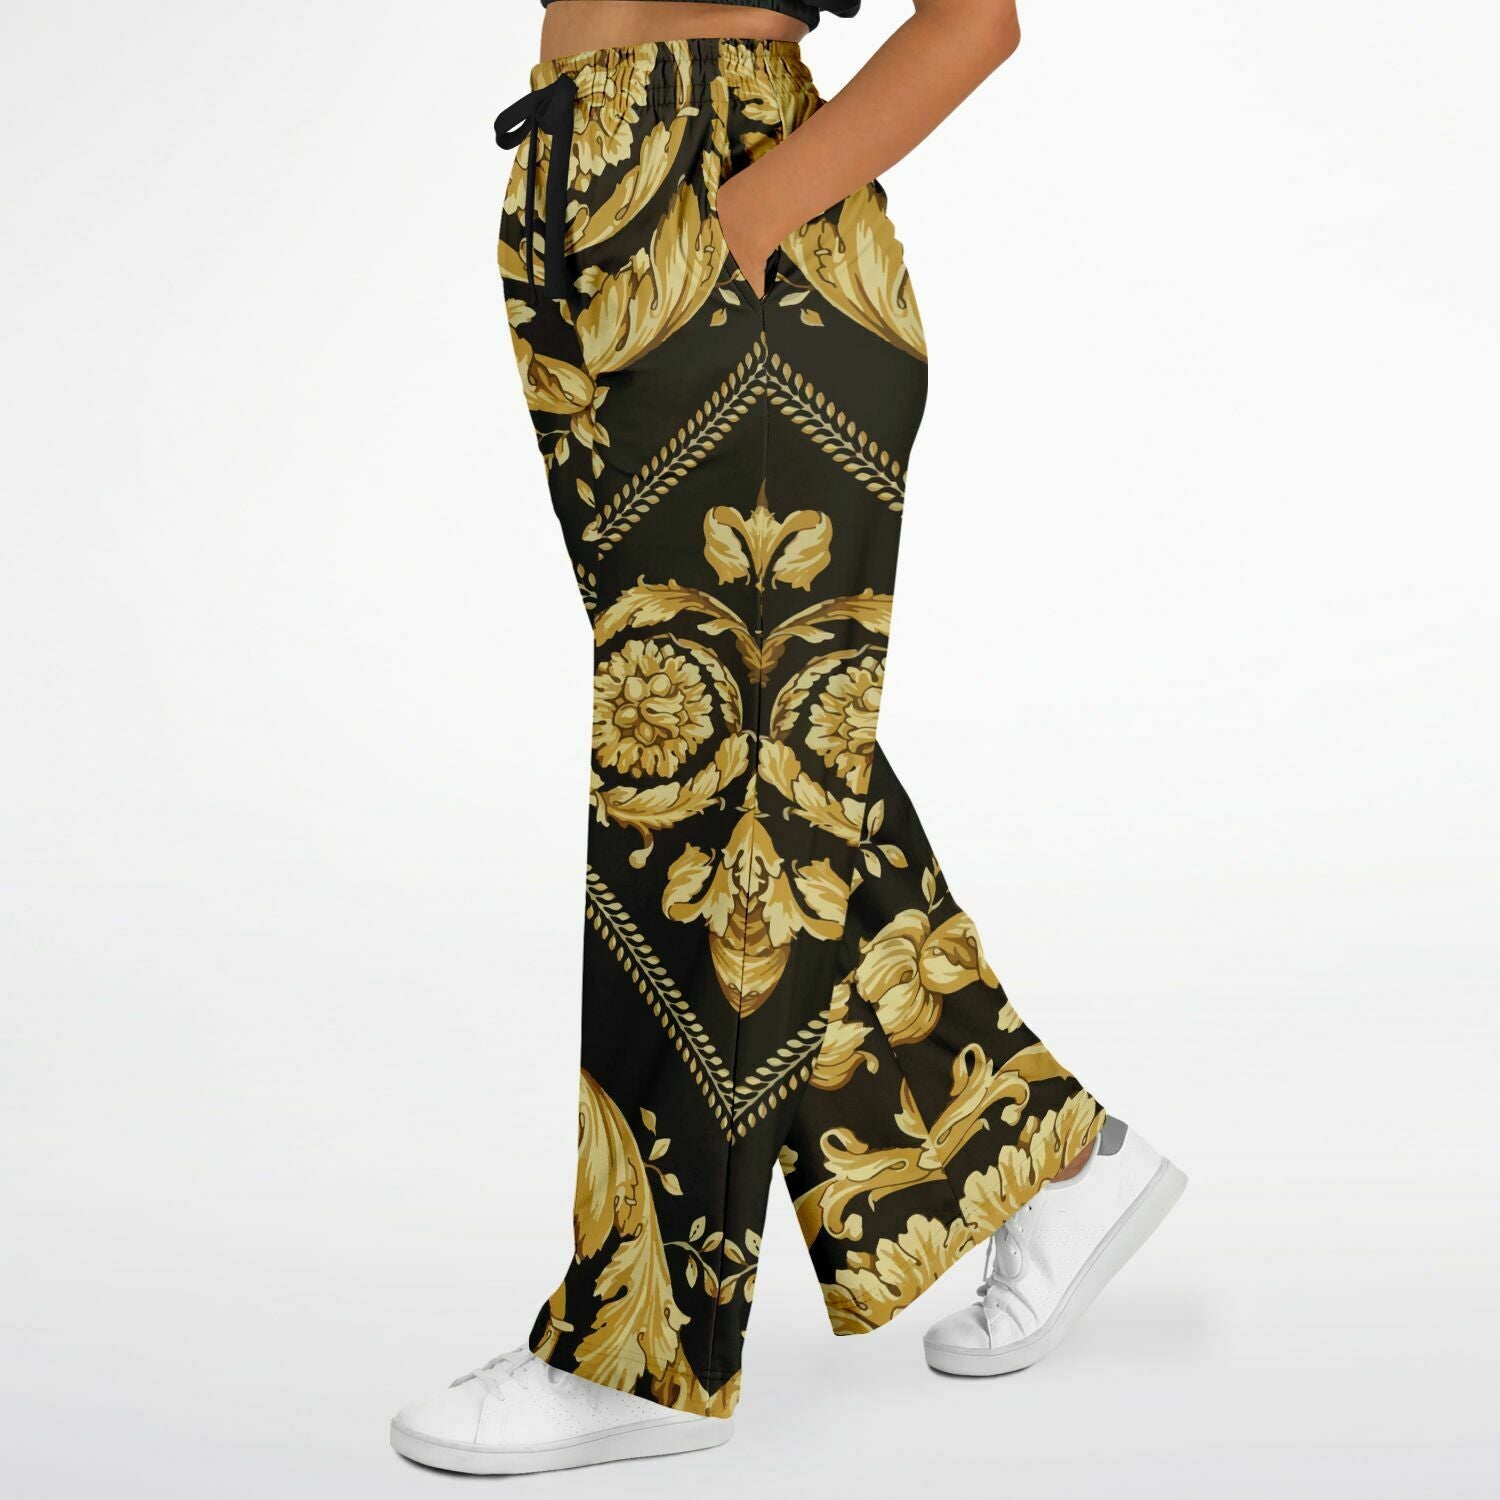 Baroque Print Gold Scarf Print Flare Trousers - HipHatter